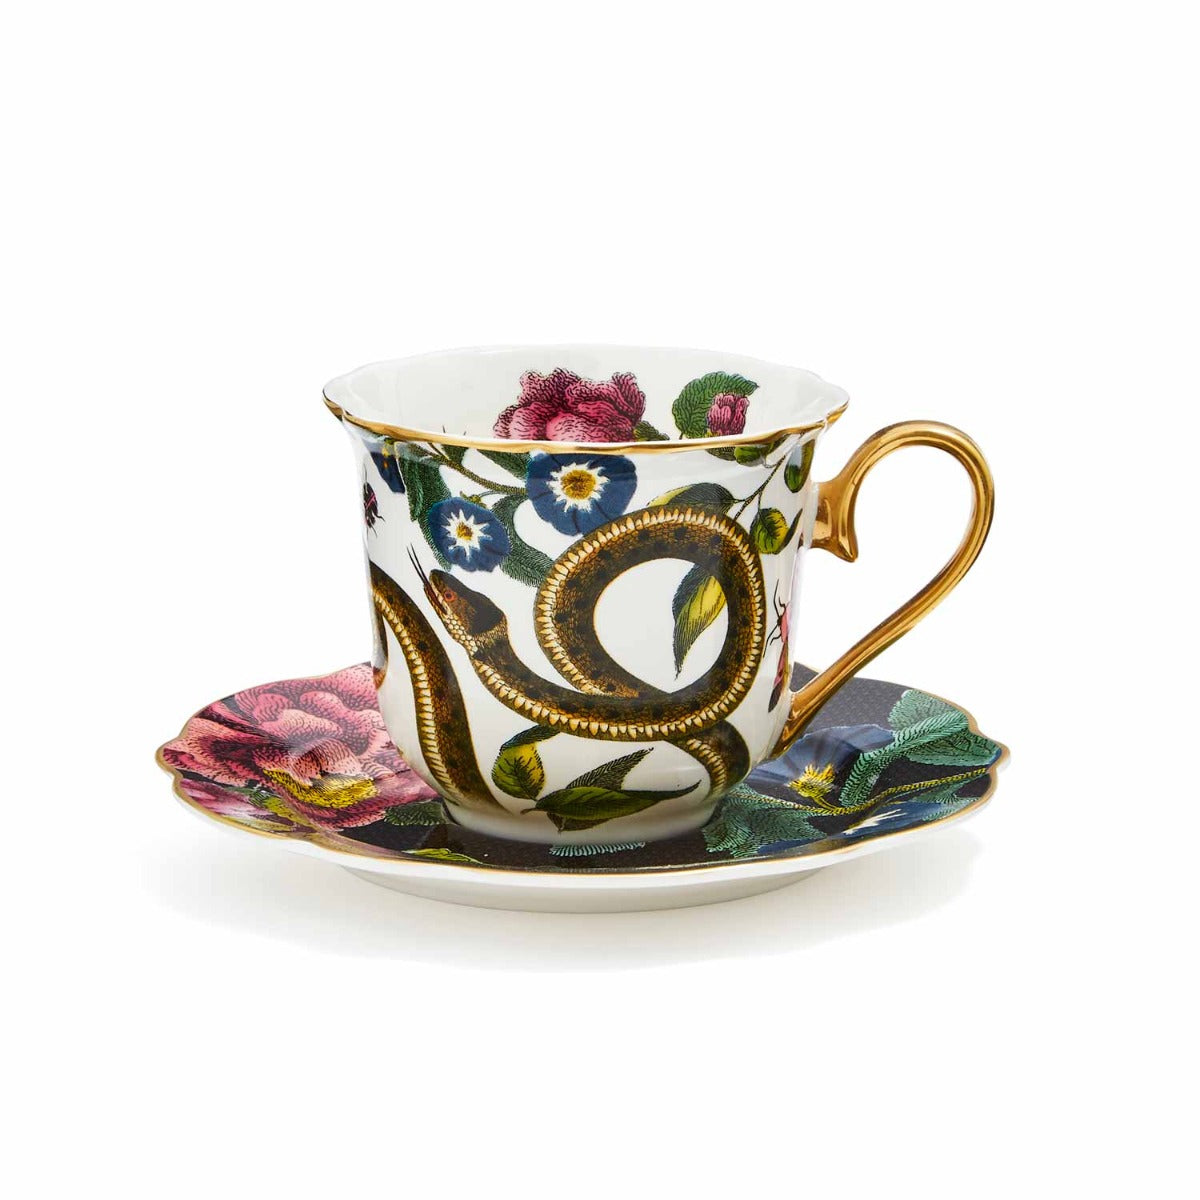 Creatures of Curiosity - Floral Serpent Teacup and Saucer - Magic Hour